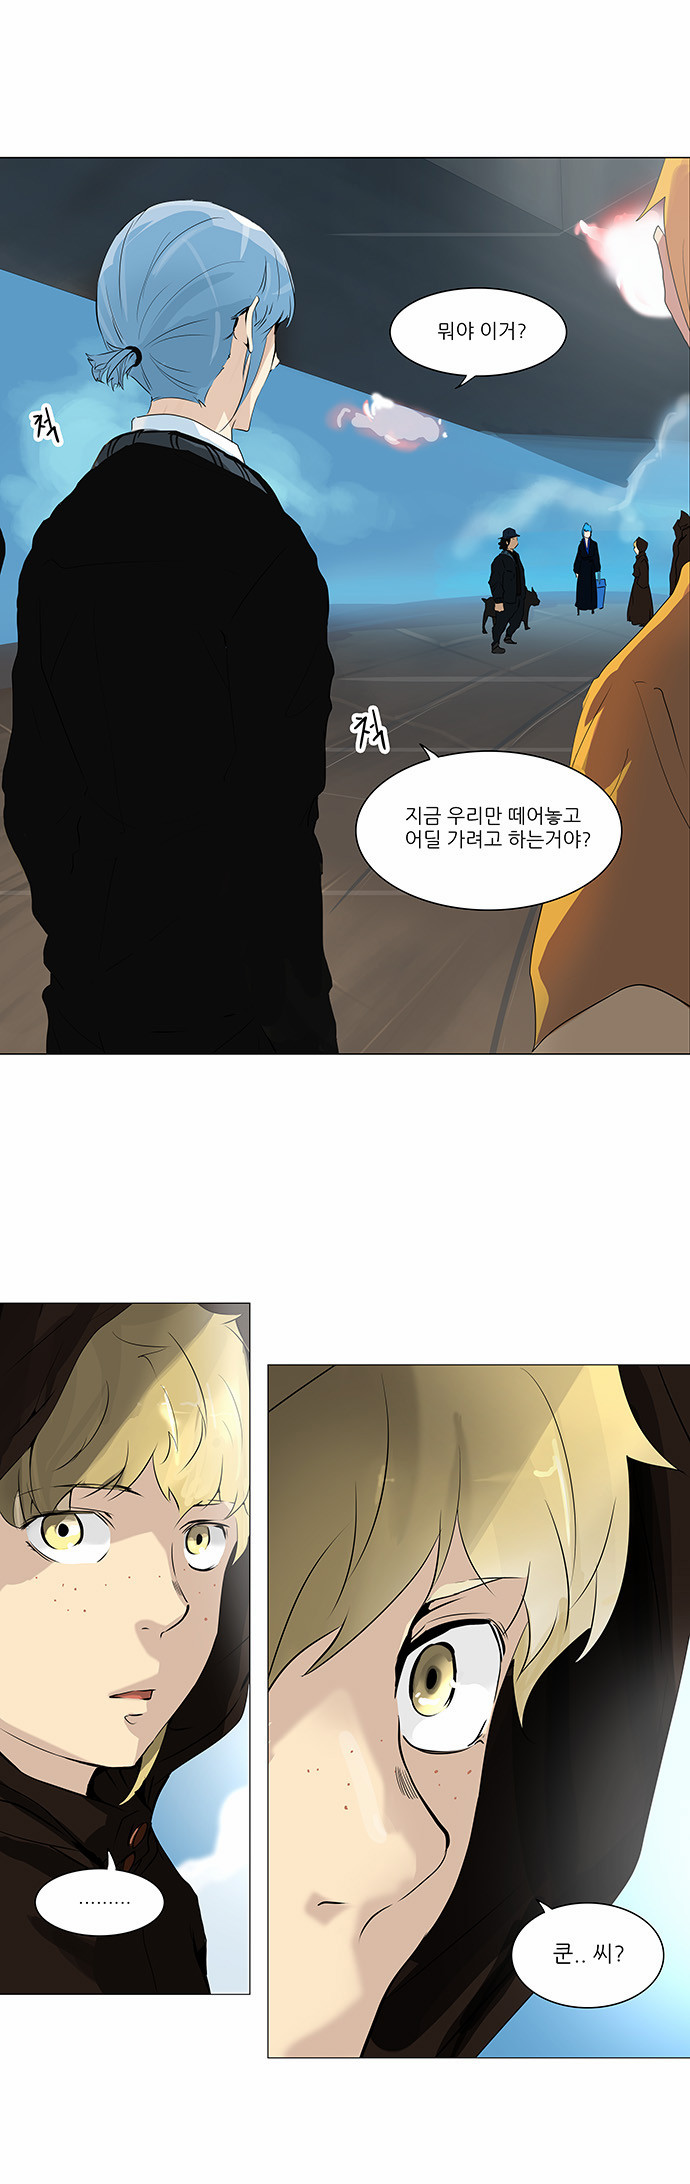 Tower of God - Chapter 225 - Page 1